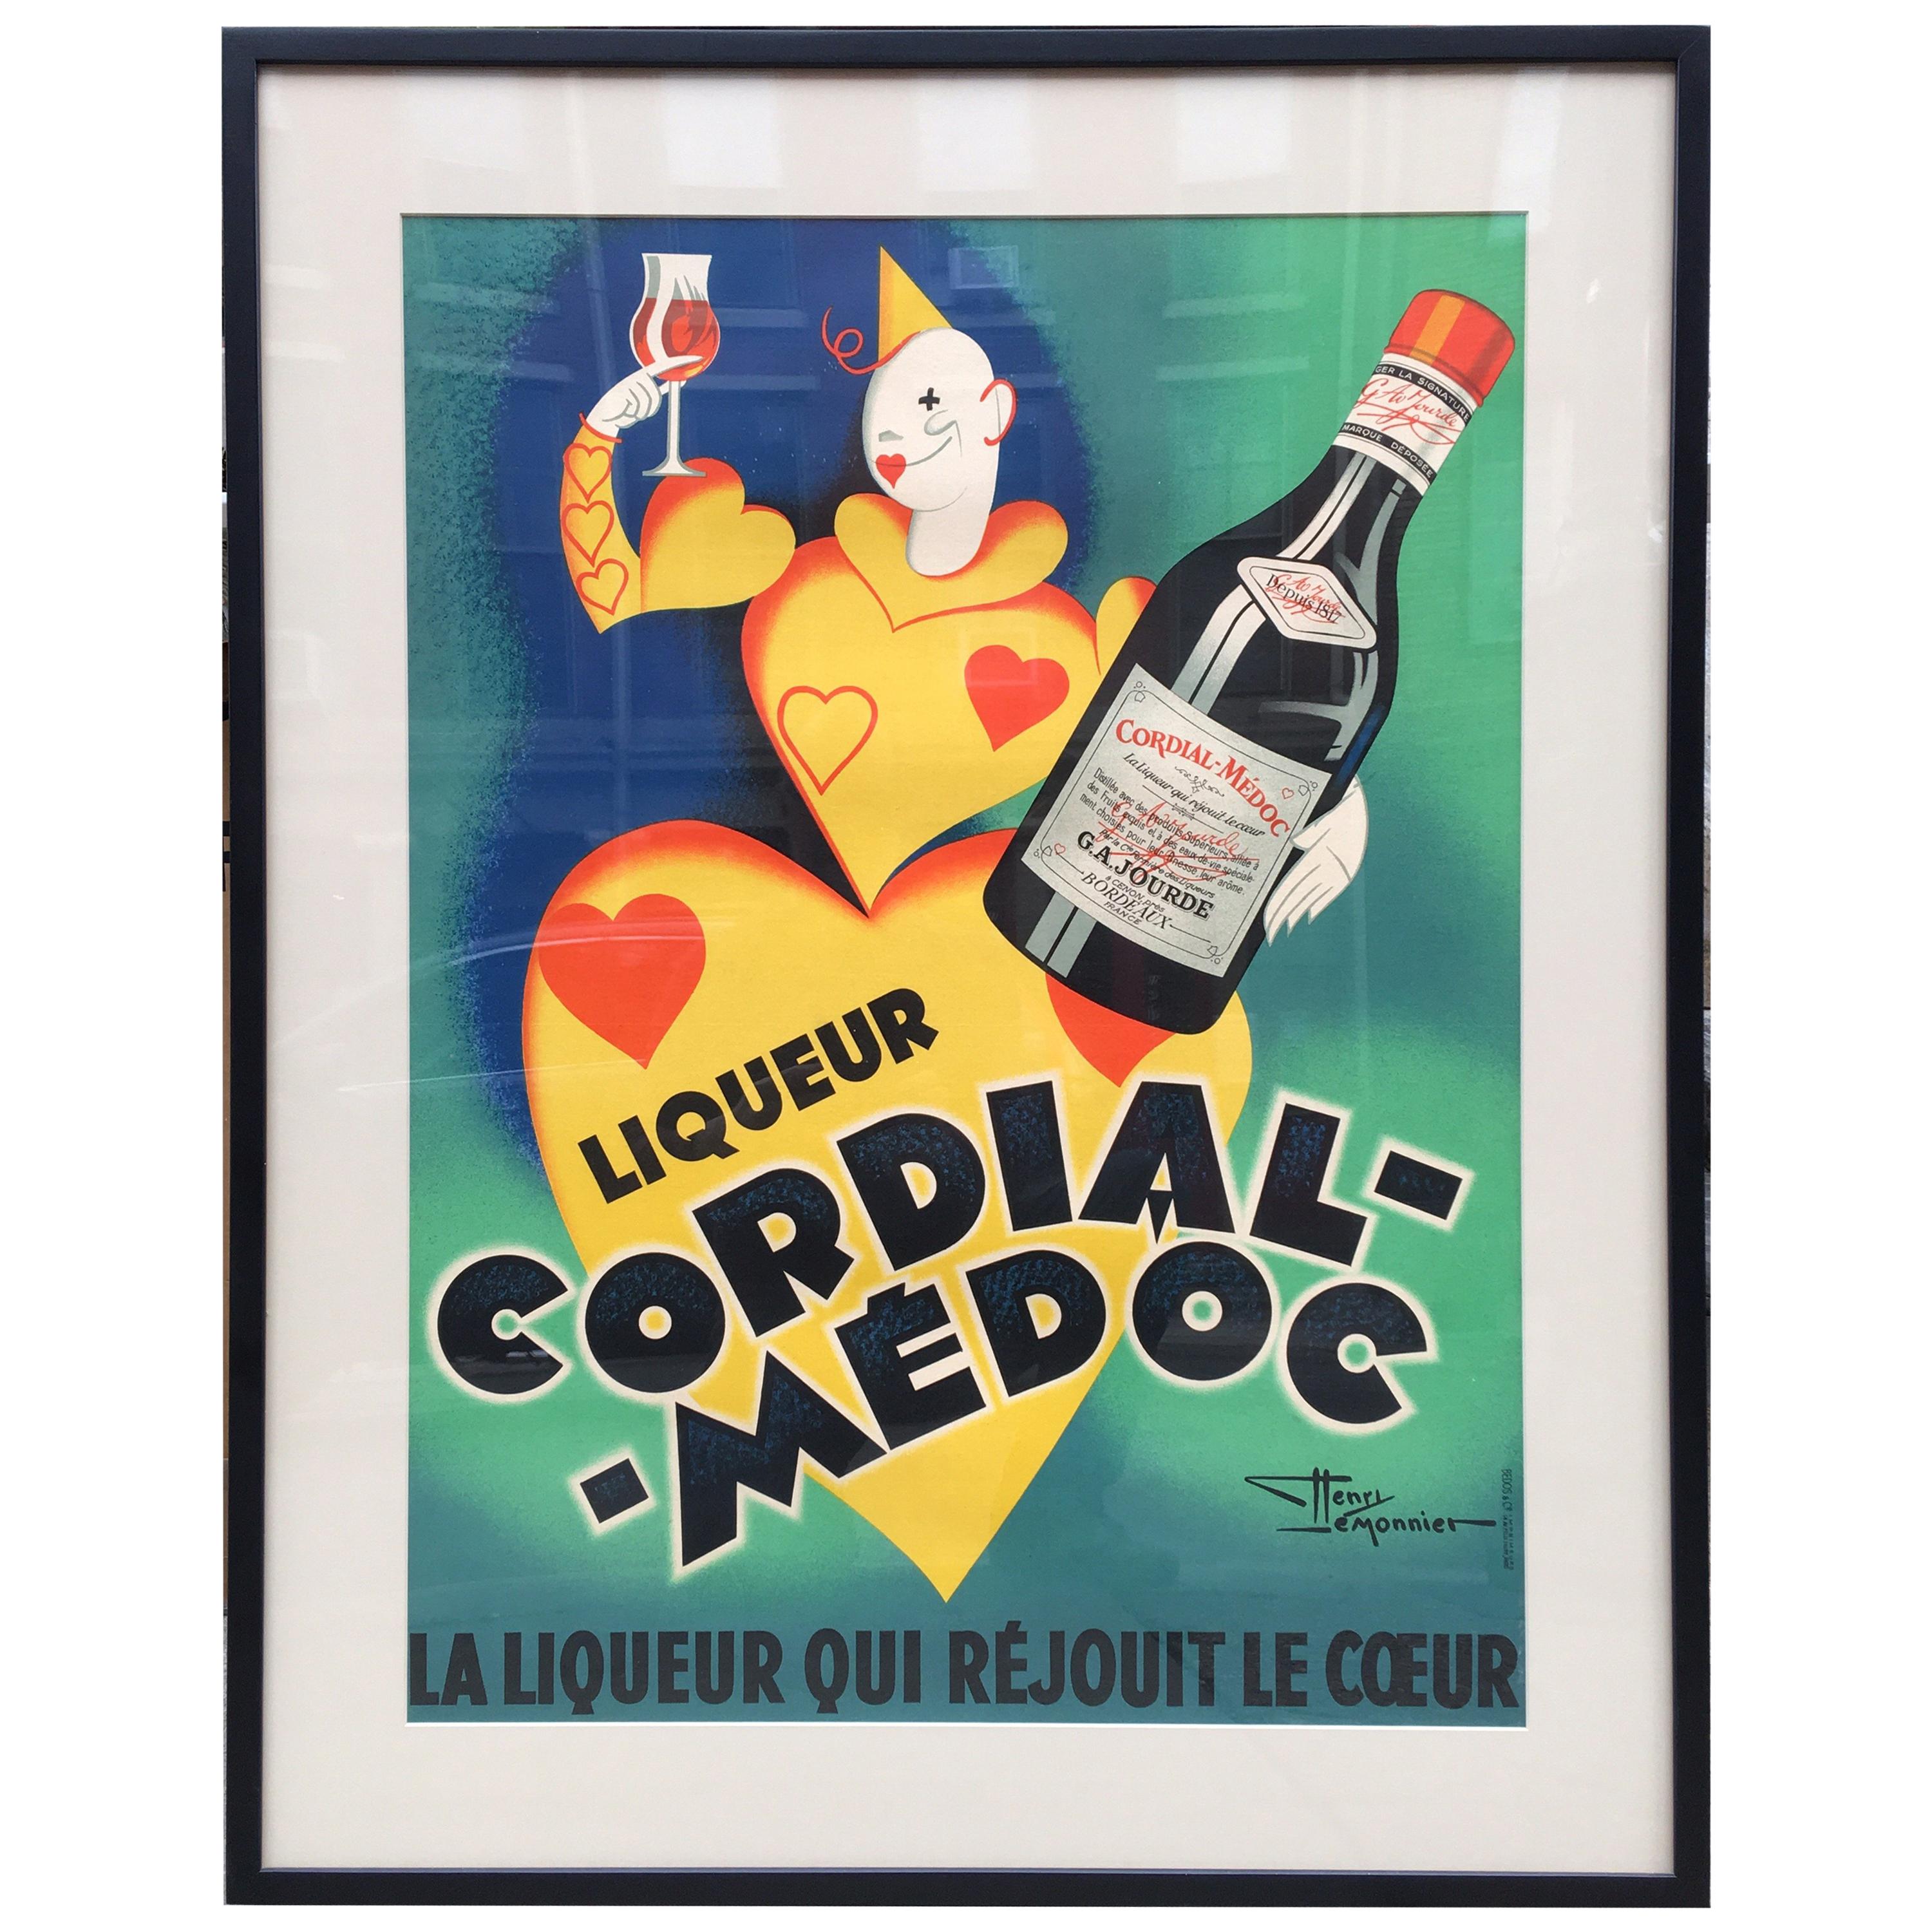 Liqueur Cordial-Medoc French Poster